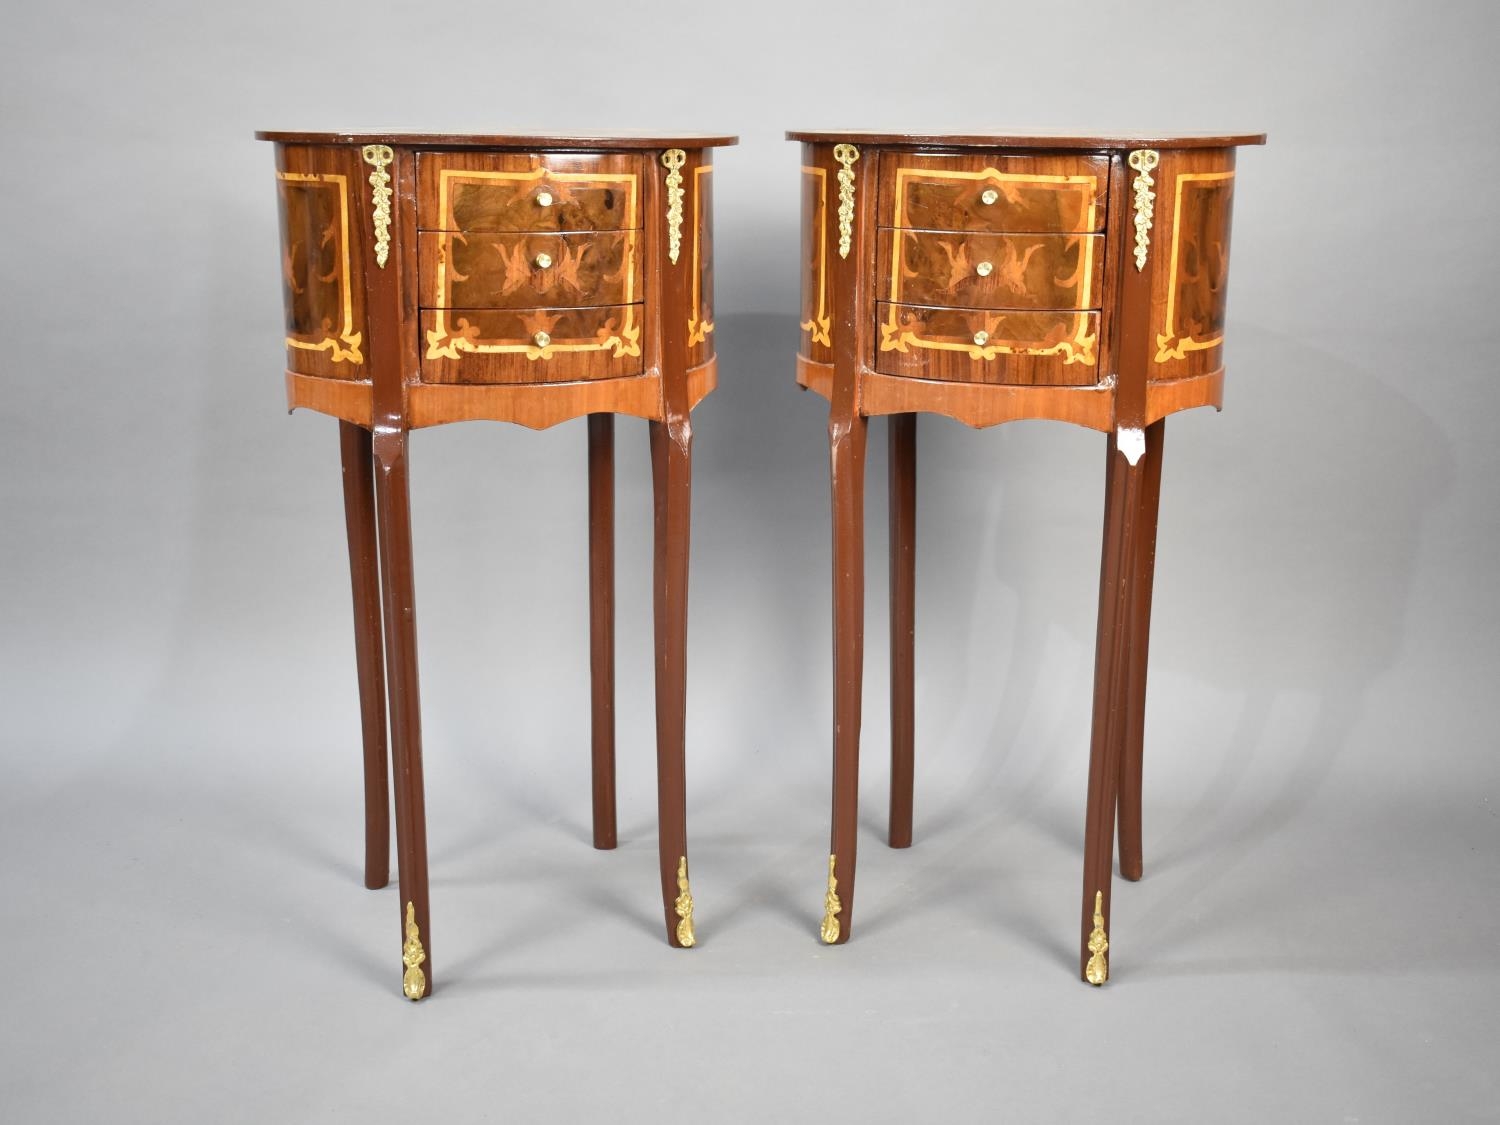 A Pair of Reproduction French Style Ormolu Mounted Inlaid Three Drawer Oval Side Cabinets on